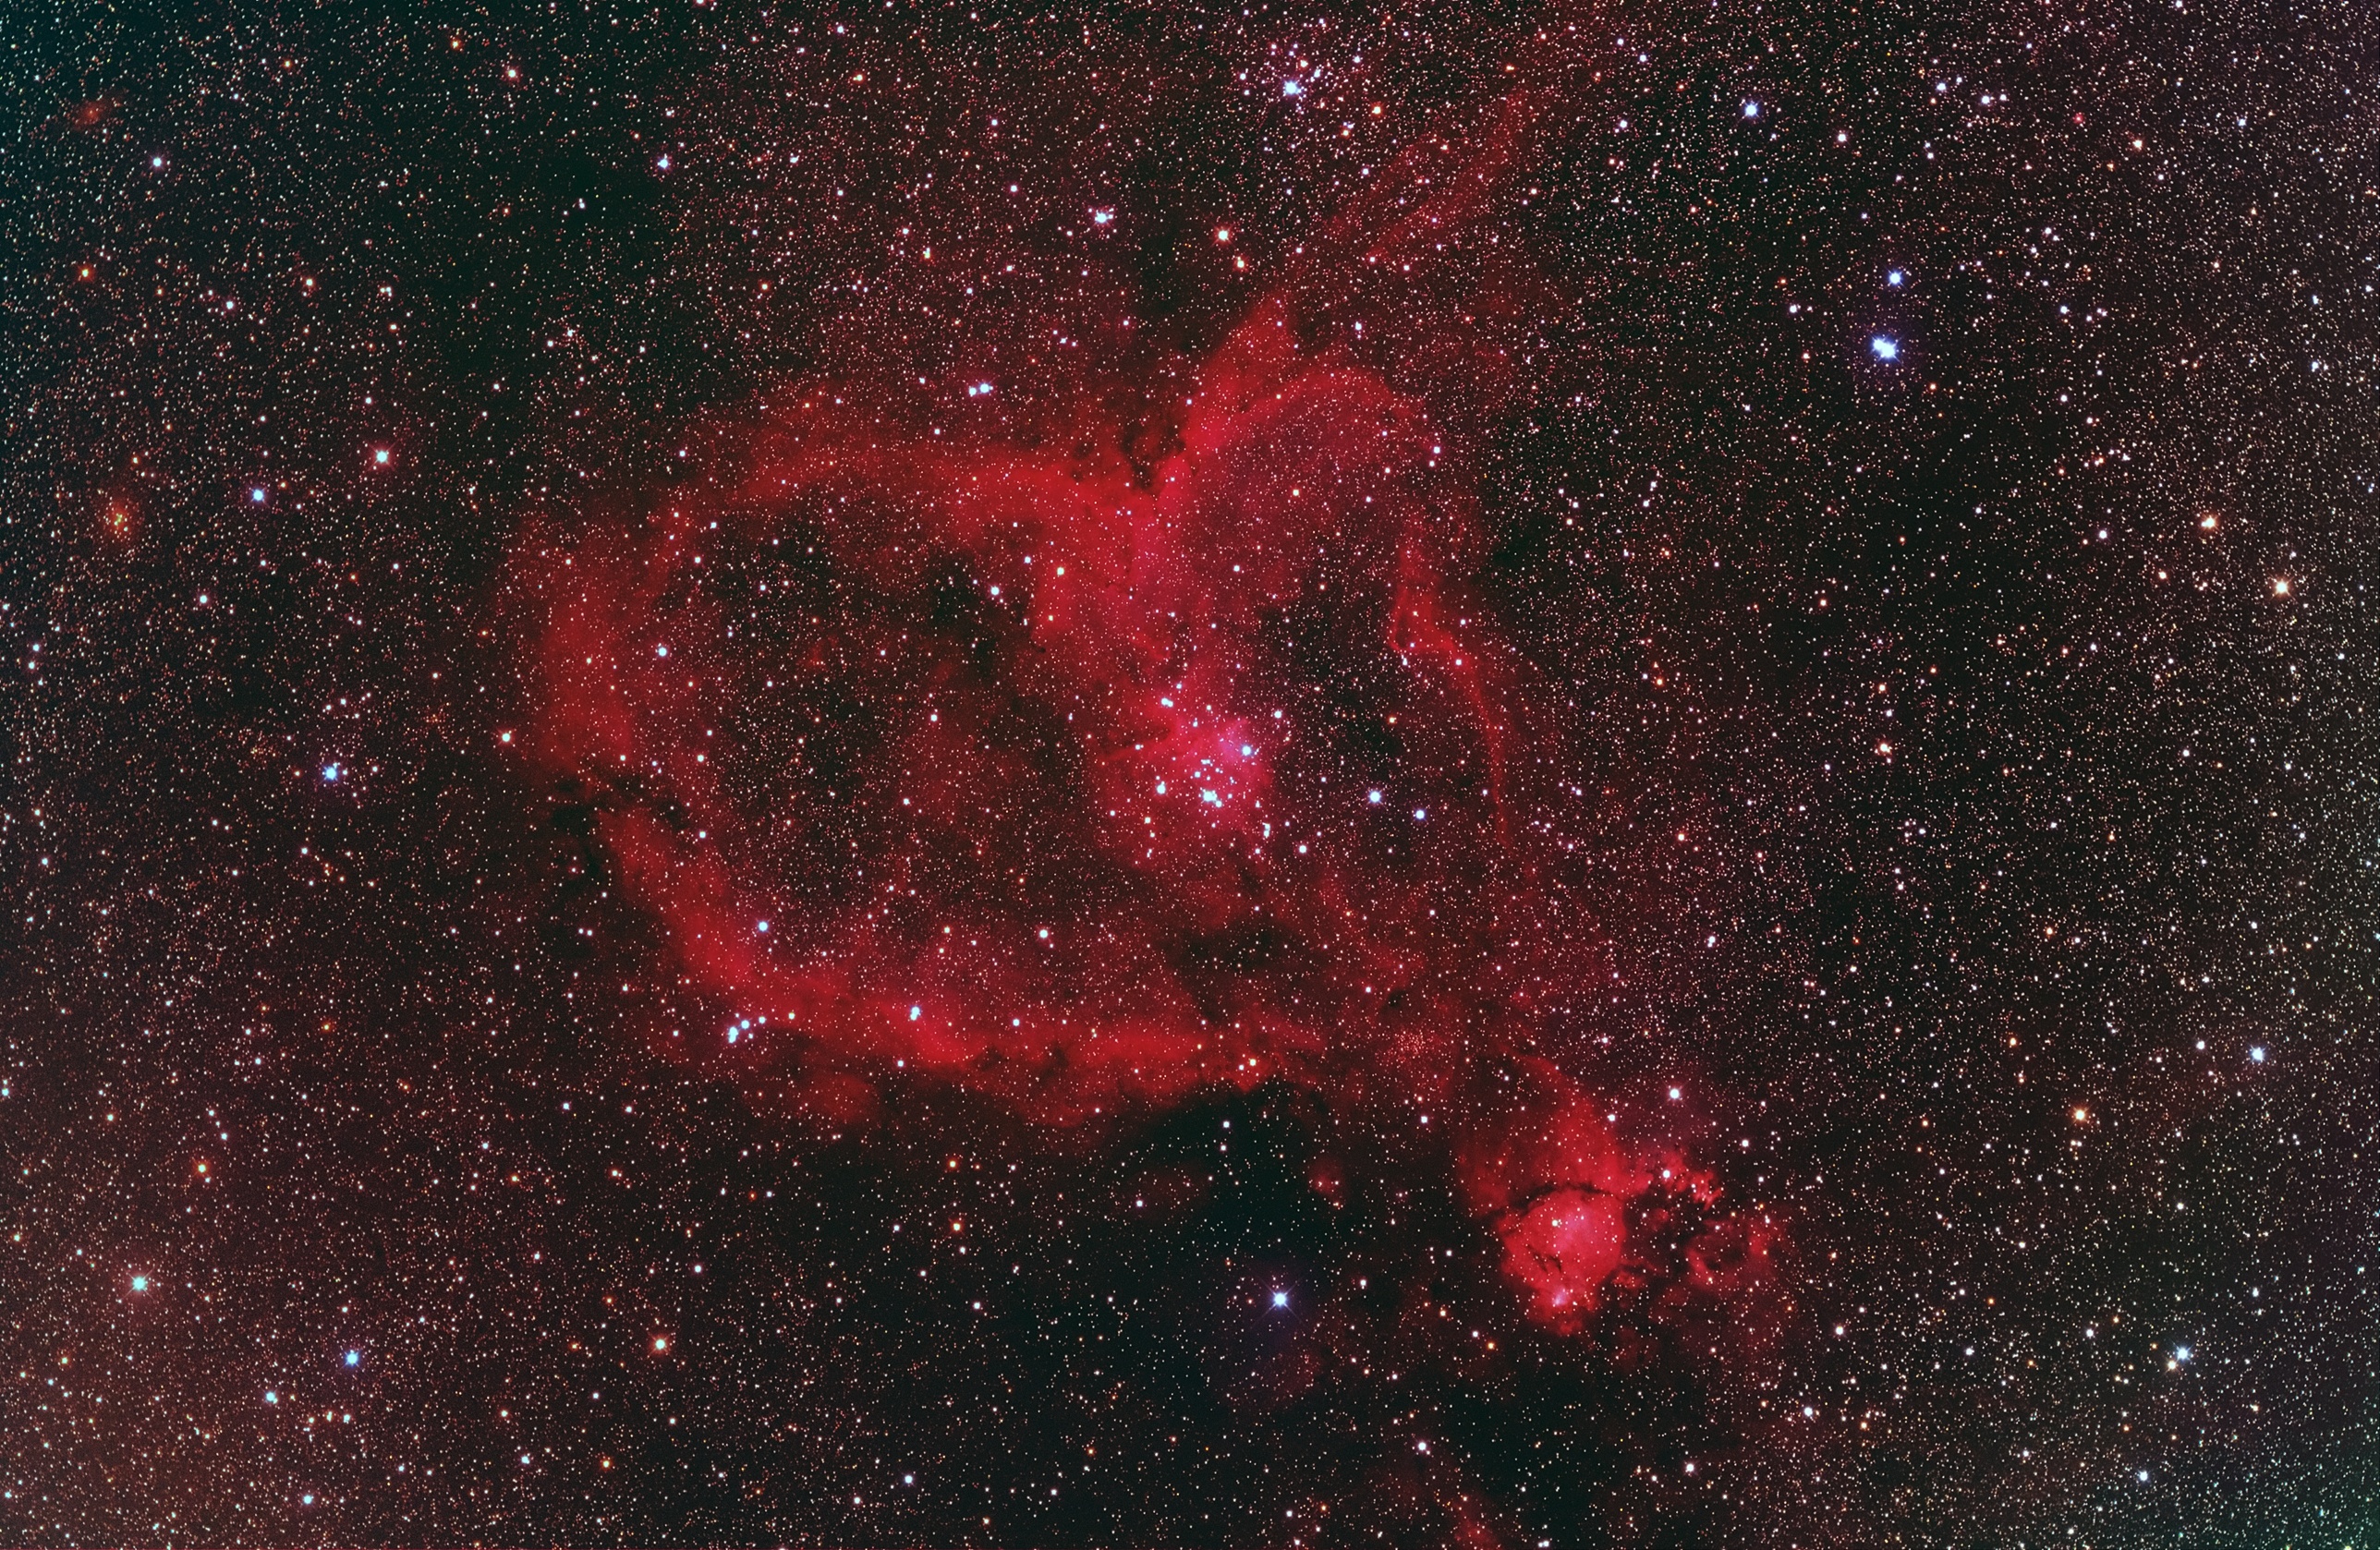 The Heart Nebula - Click on this image to return to the smaller version of the image